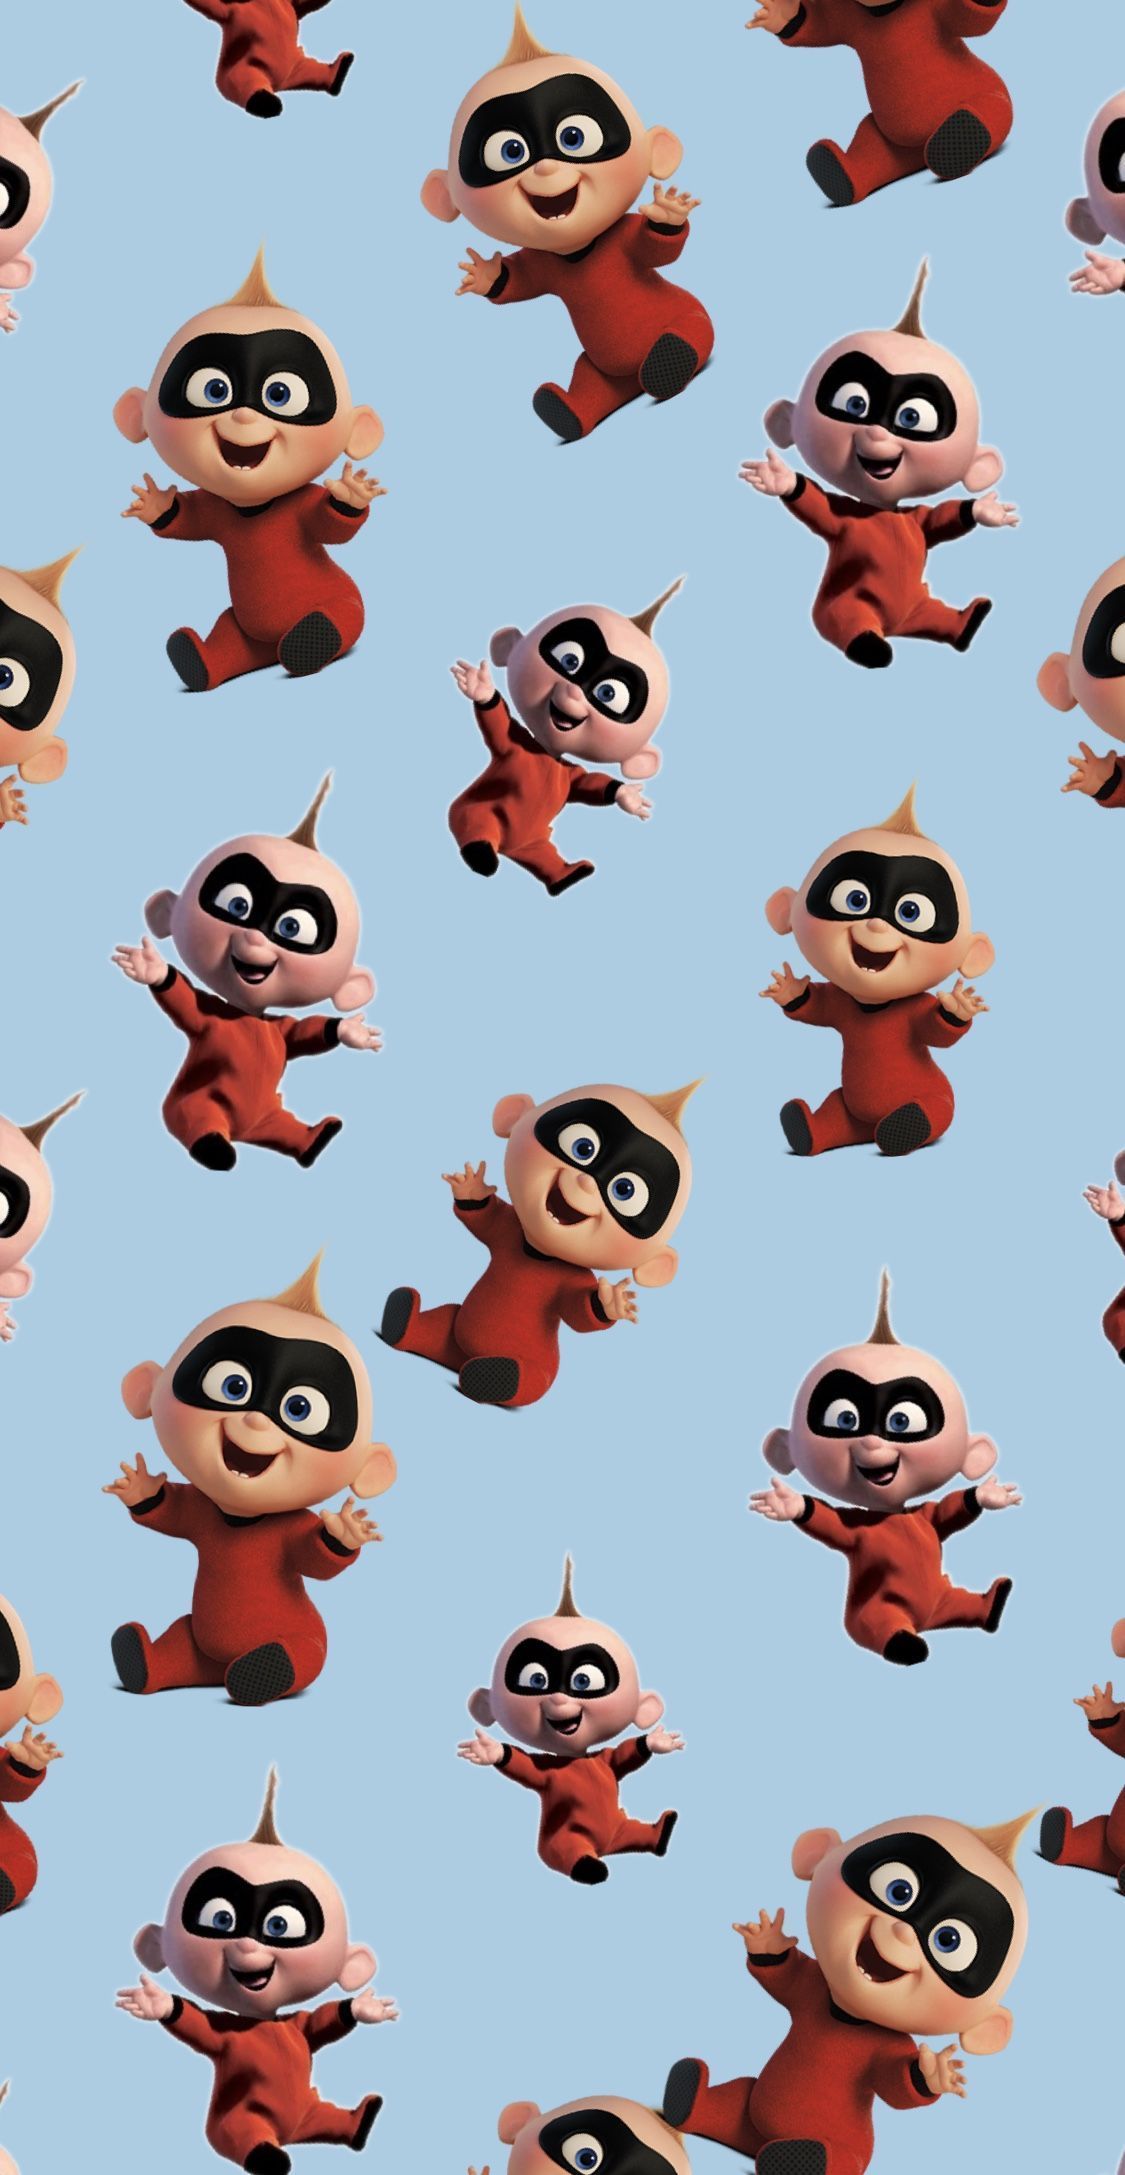 Pixar Wallpaper for iPhone from Uploaded by user. Disney wallpaper, Cute disney wallpaper, Incredibles wallpaper